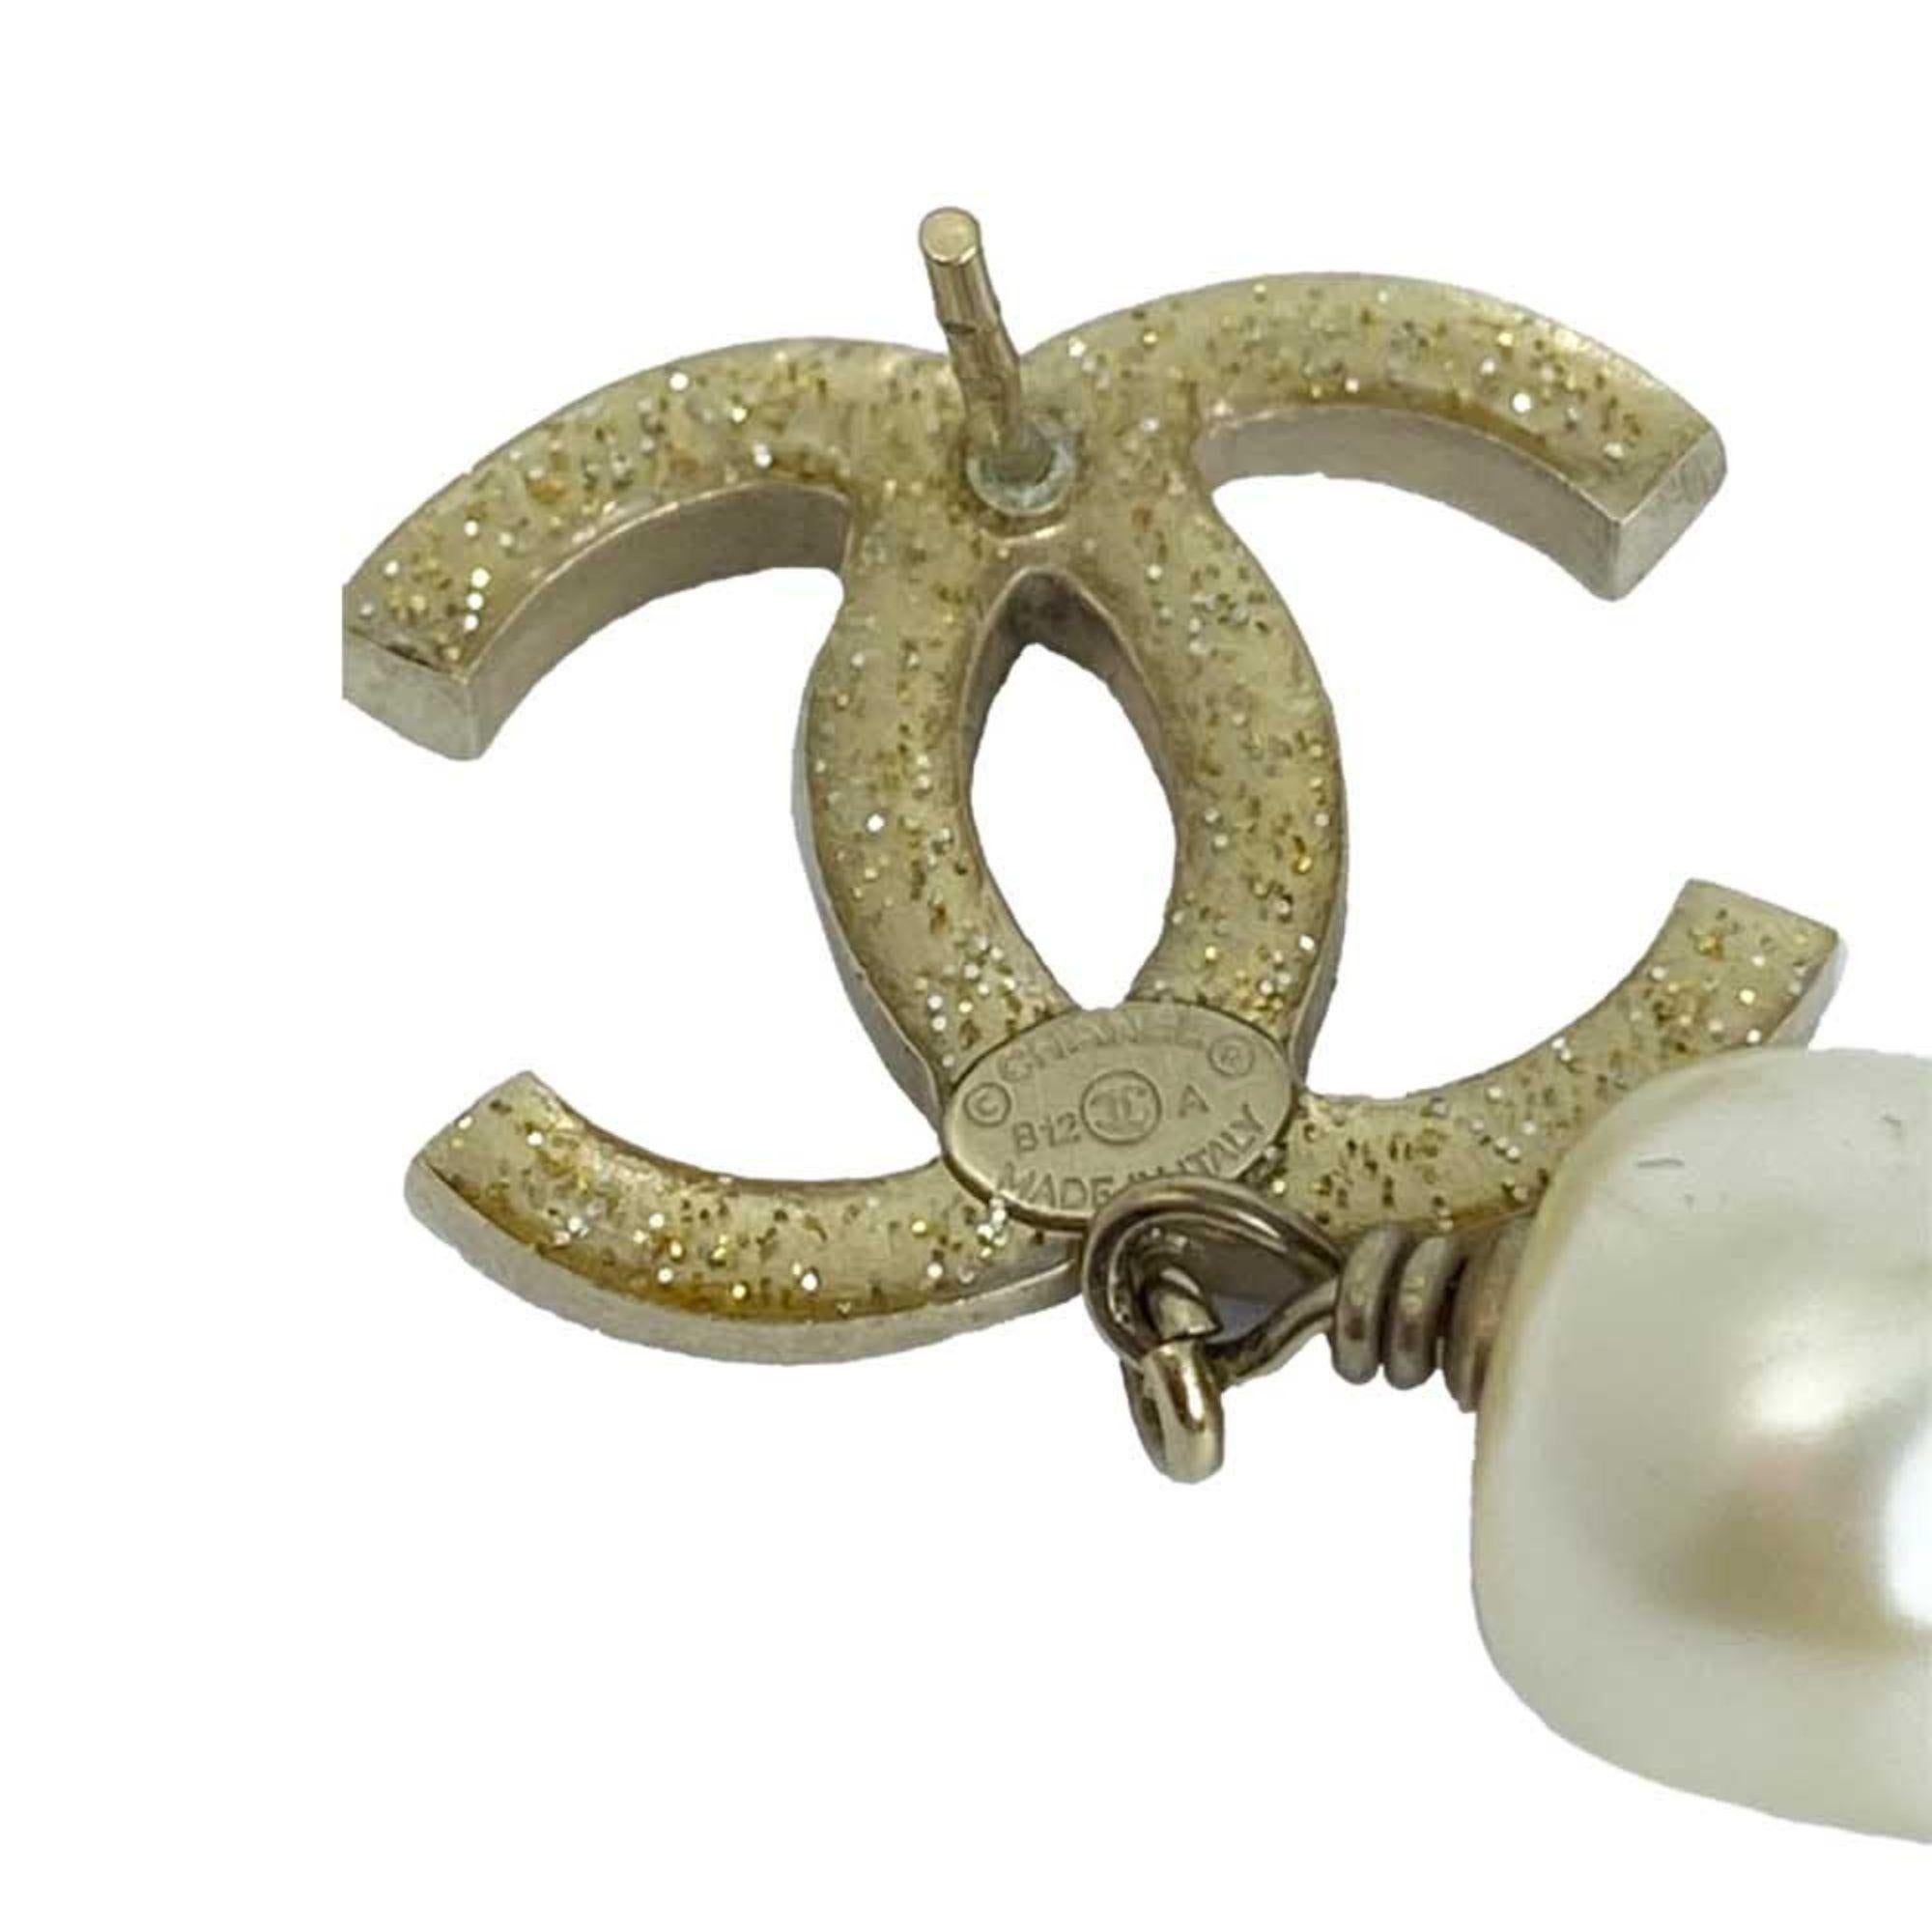 Chanel CC Glass Pearl Drop Earrings feature the classic CC emblem in gold tone hardware, embellished with dazzling diamantes and hanging glass pearls. Pale gold tone hardware with black, grey and silver diamantes; hanging glass pearls.